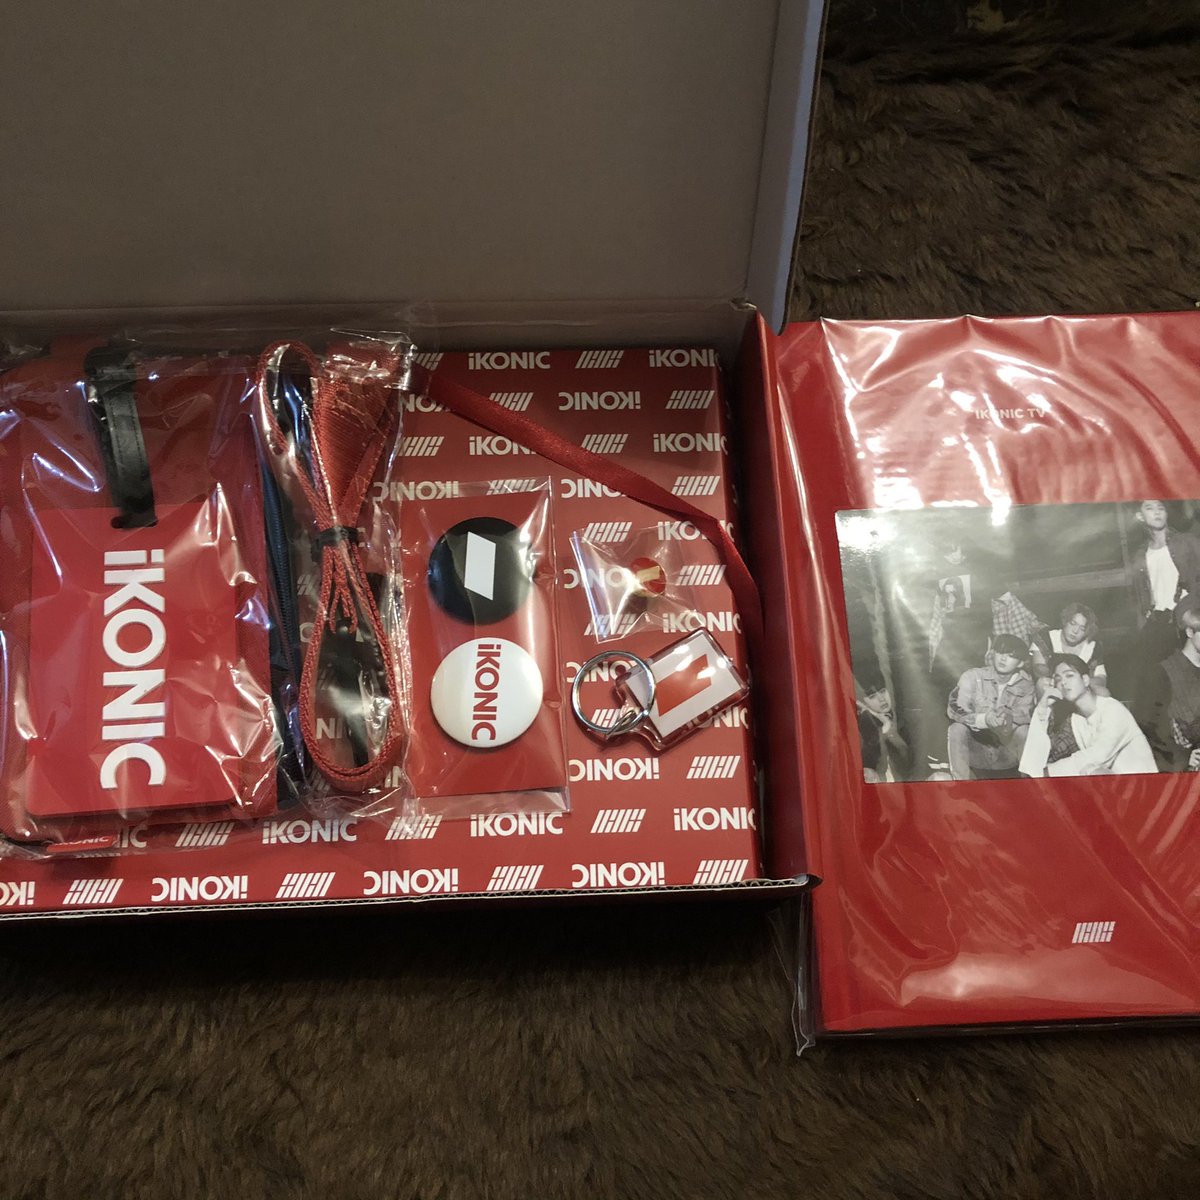 ADDING ANOTHER ONE!!! iKONIC kit 2nd gen complete except card and bnew and sealed from  @_junamarie /  @JunaPabiliEst20 DON'T FORGET TO SEND YOUR RECEIPT WHEN YOU ARE DONE!!! THANK YOU SO MUCH. MAKAKA 10K NA TAYO!!!! LAHAT PARA SA DAD NI TRIX. SALAMAT PO!